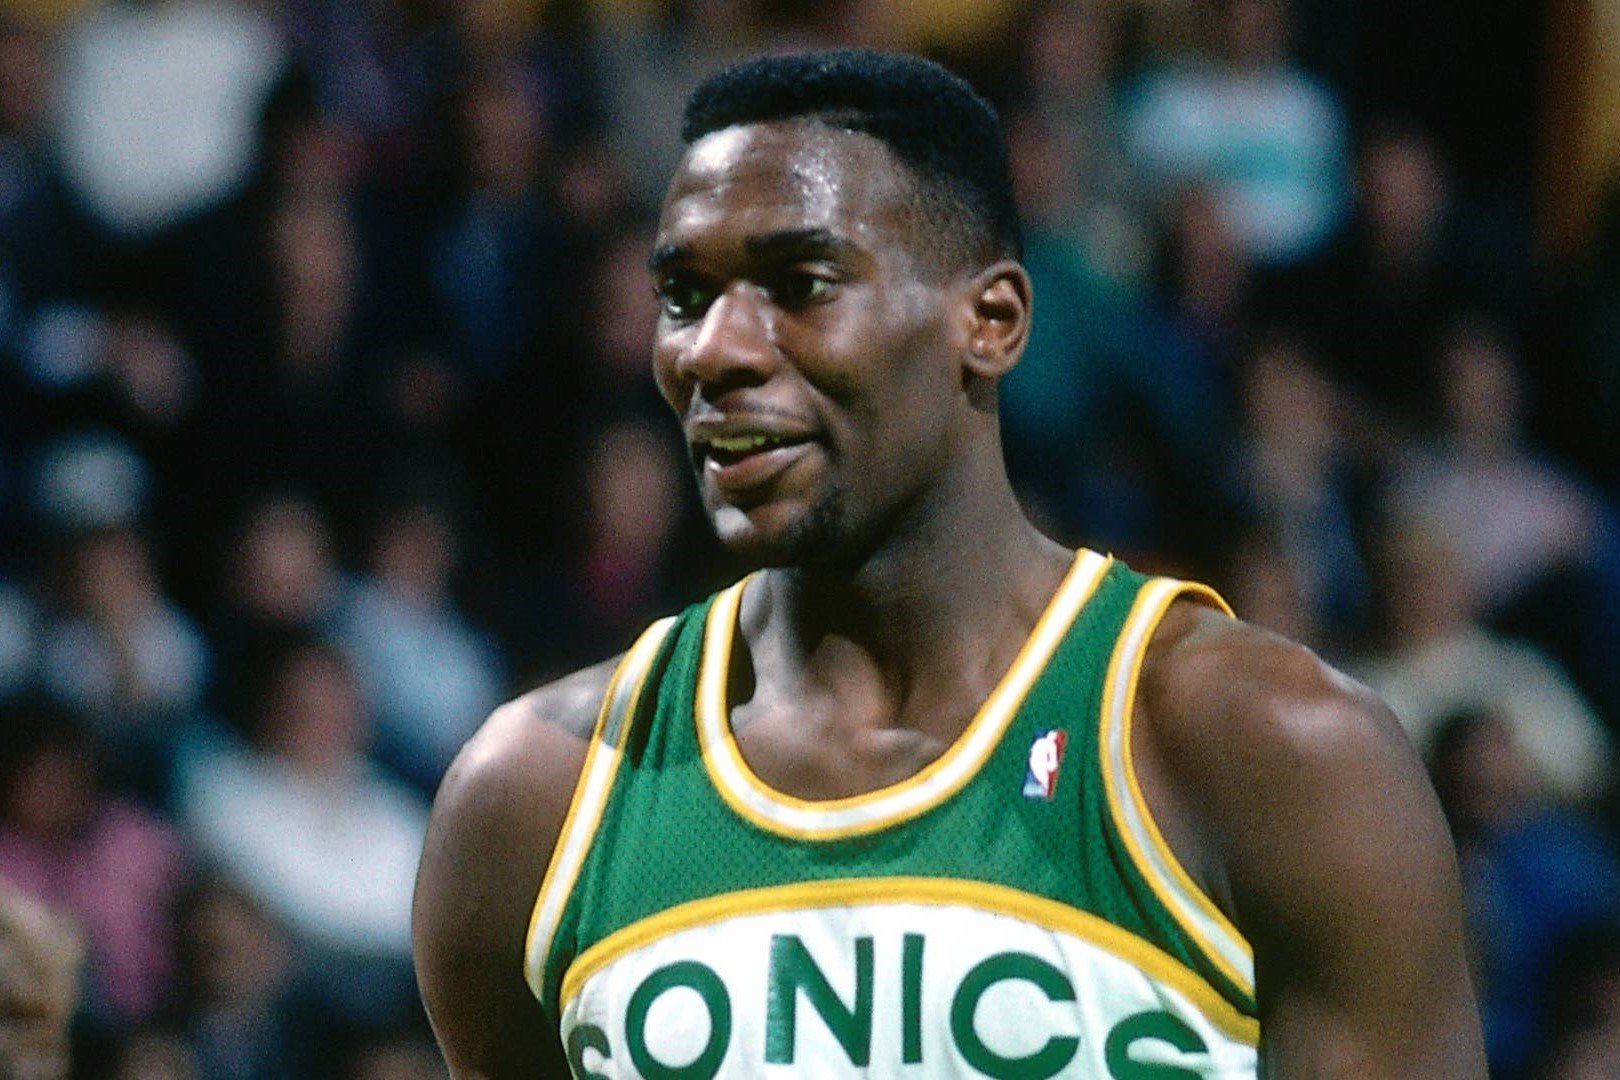 Will Shawn Kemp Sons Disease Prevent Him From Entering NBA